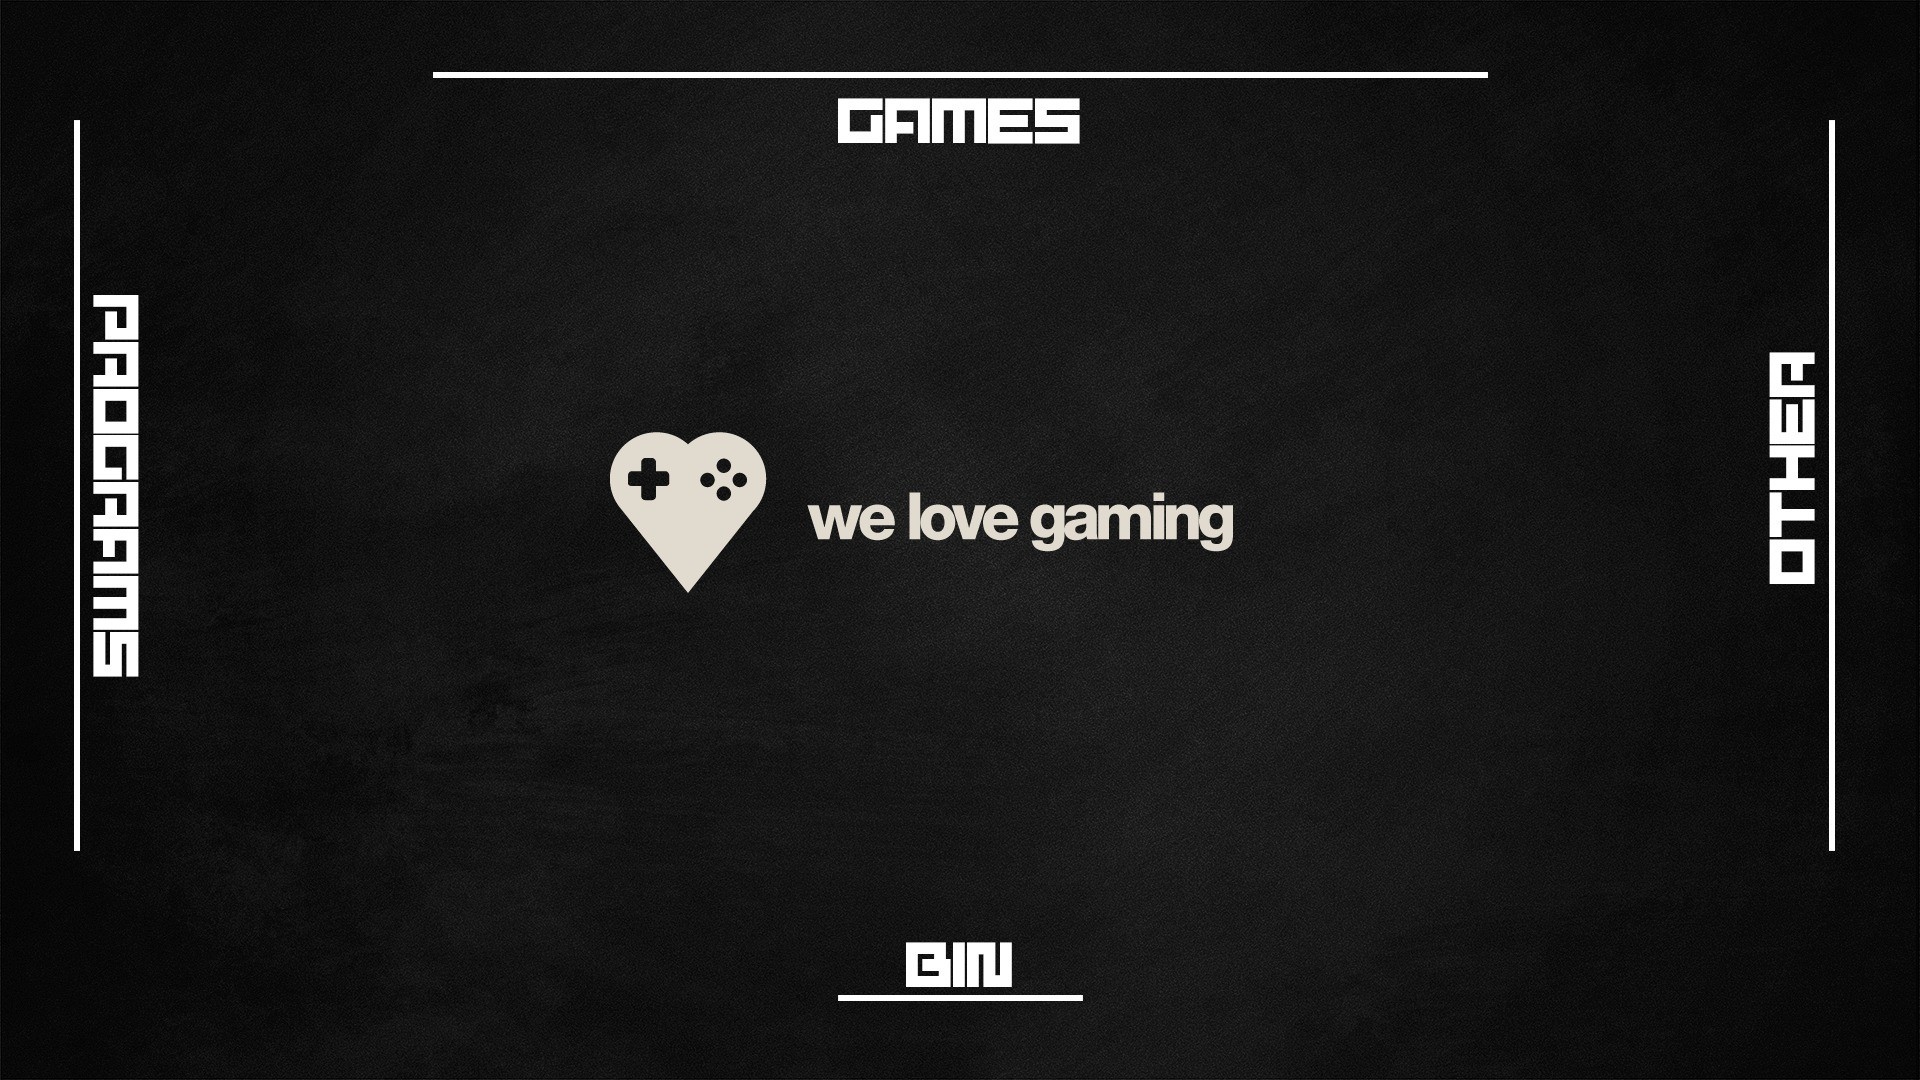 Лов гейм. I Love games. We Love Gaming. Astro Gaming Wallpaper. Game over.